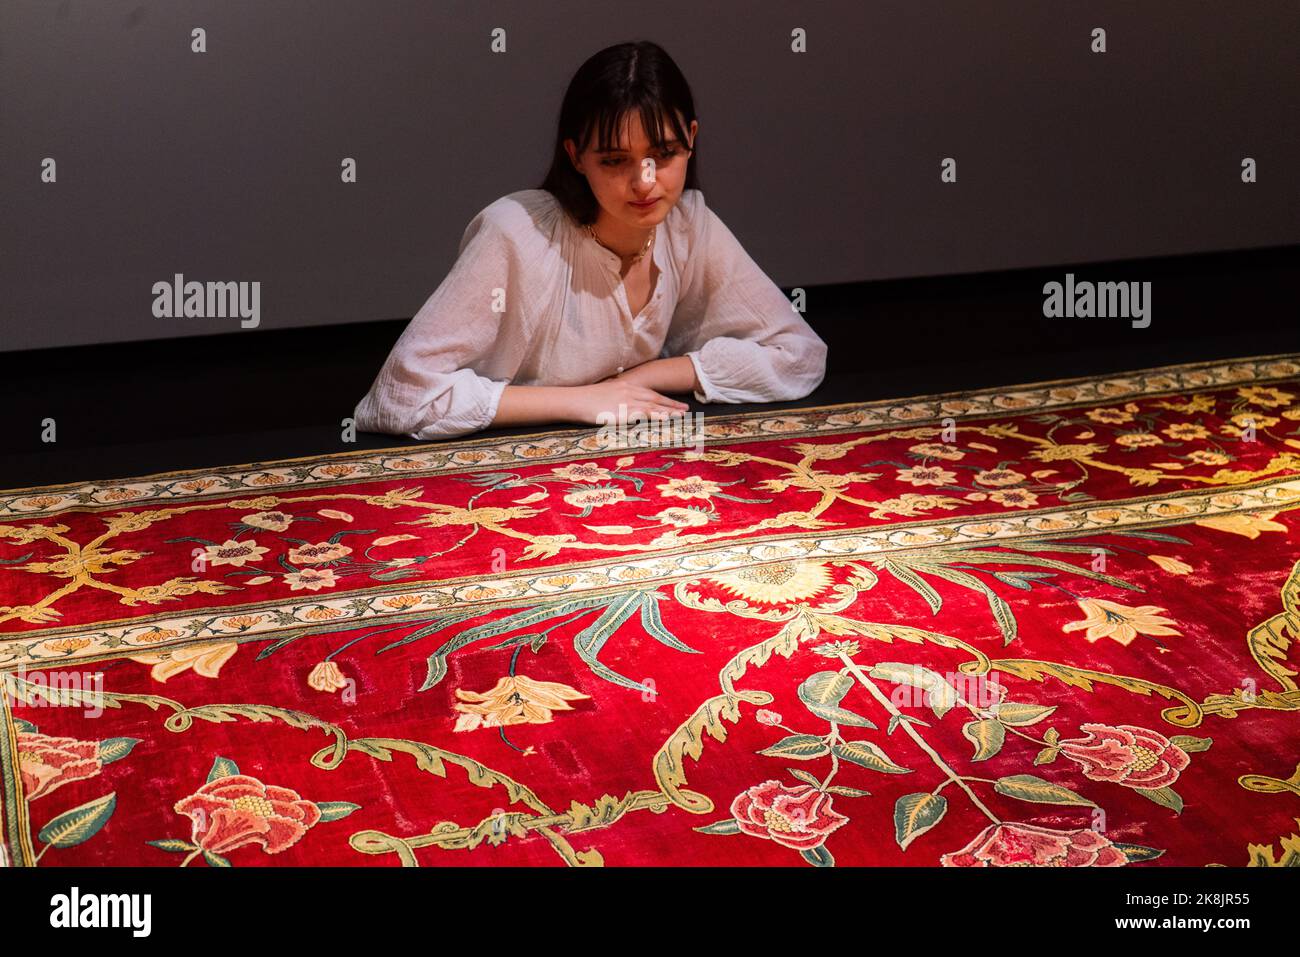 London UK. 24 October 2022 . A RARE ROYAL MUGHAL PASHIMA CARPET Northern India, circa 1650, Estimate GBP 2,500,000-3,500,000. Highlights from the auction at Christie's  Art of the Islamic and Indian World's including Oriental rugs and carpets. The sale takes place on 27 October at Christie;s King Street .Credit: amer ghazzal/Alamy Live News Stock Photo